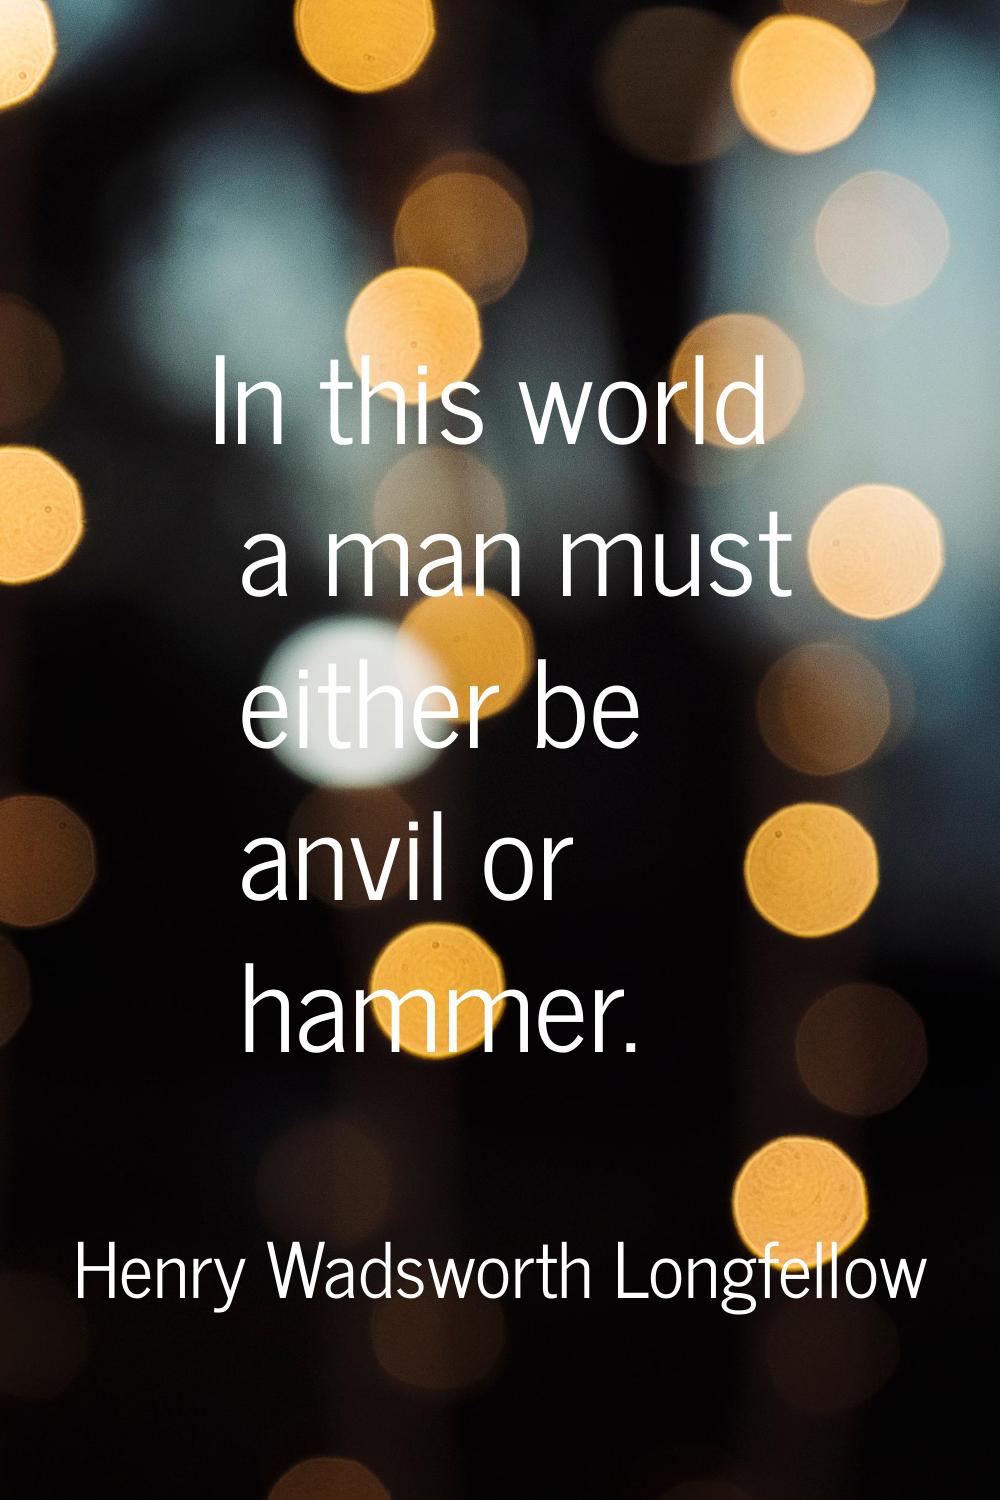 In this world a man must either be anvil or hammer.